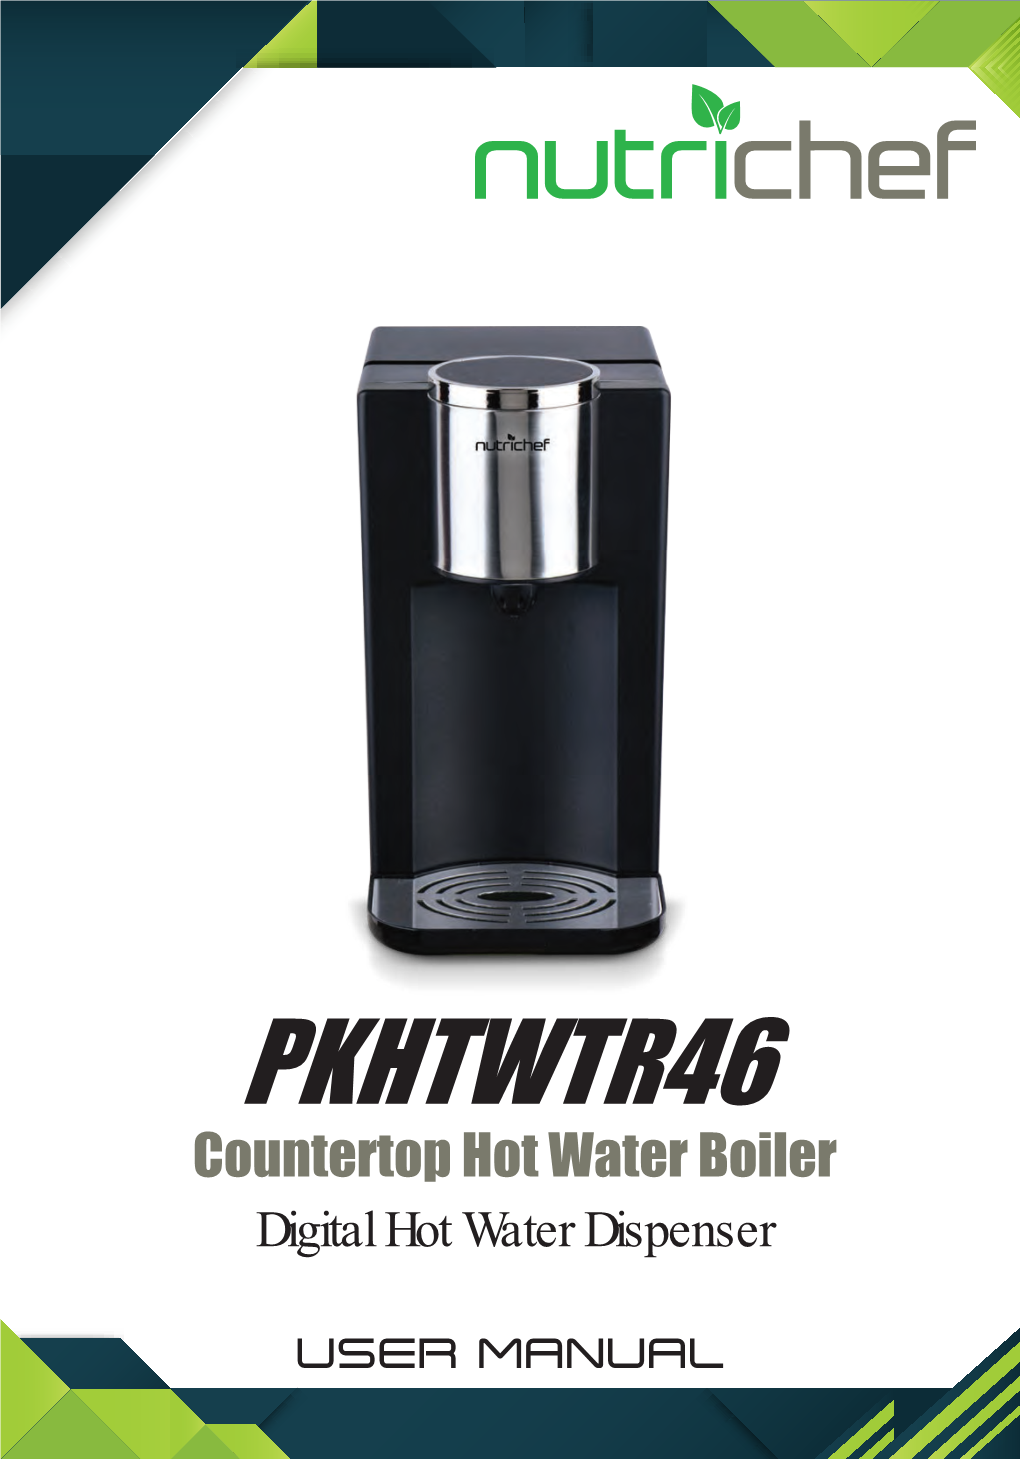 PKHTWTR46 Countertop Hot Water Boiler Digital Hot Water Dispenser IT IS ESSENTIAL THAT THIS APPLIANCE IS INSTALLED CORRECTLY